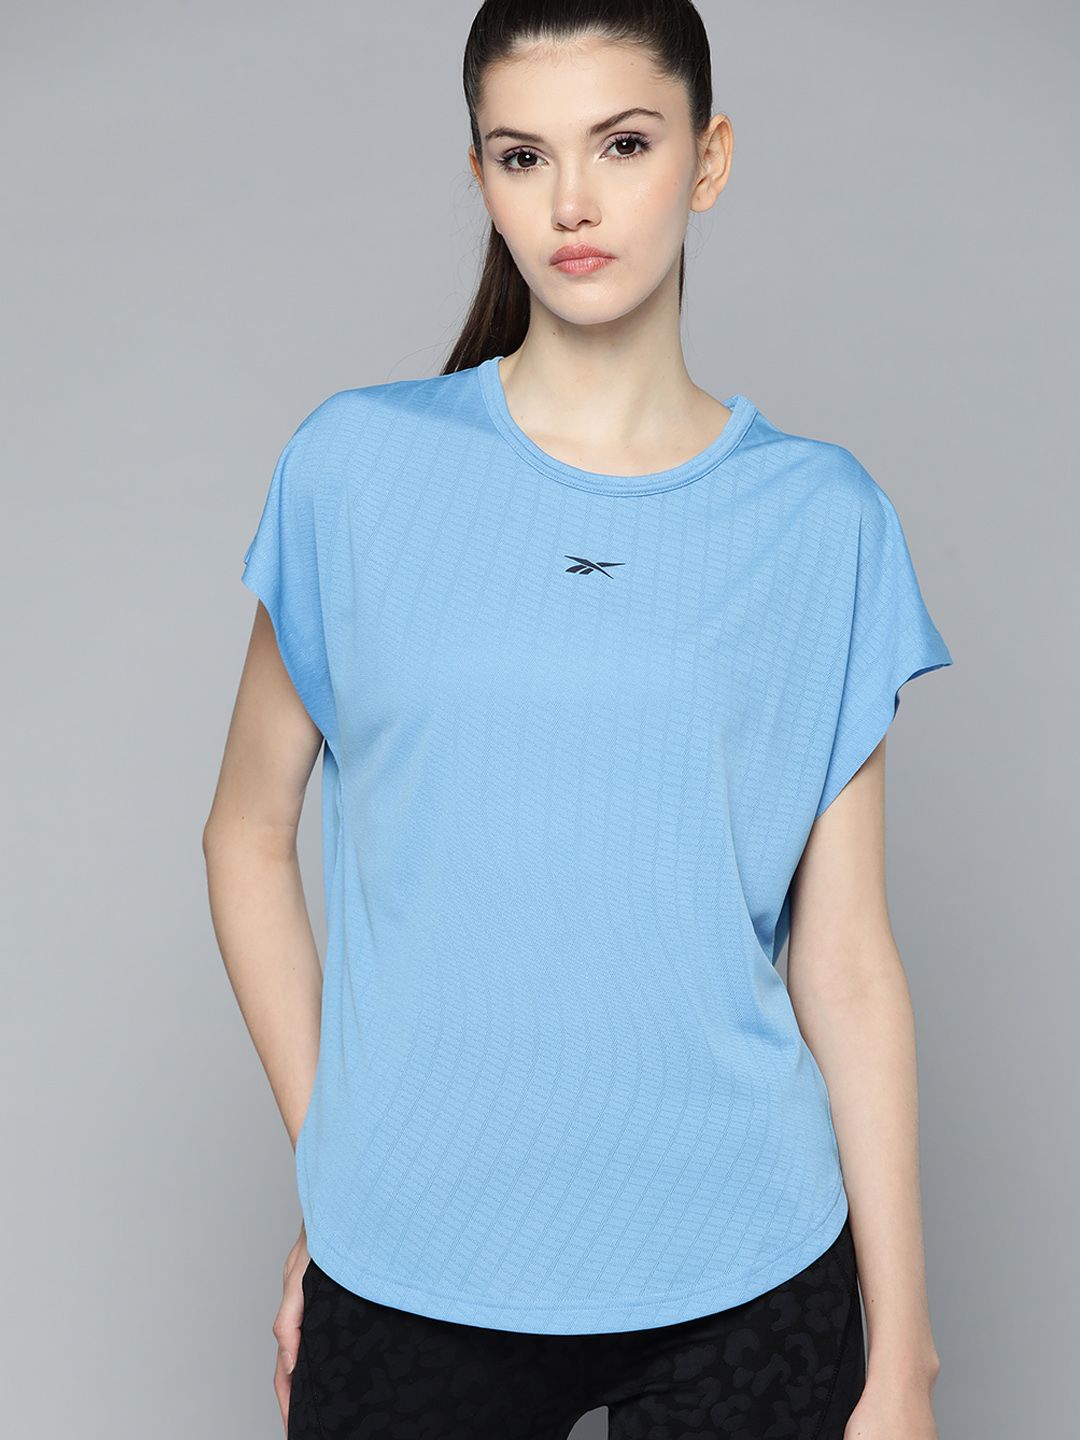 Reebok Women Blue Printed Extended Sleeves UBF Perforated T-shirt Price in India